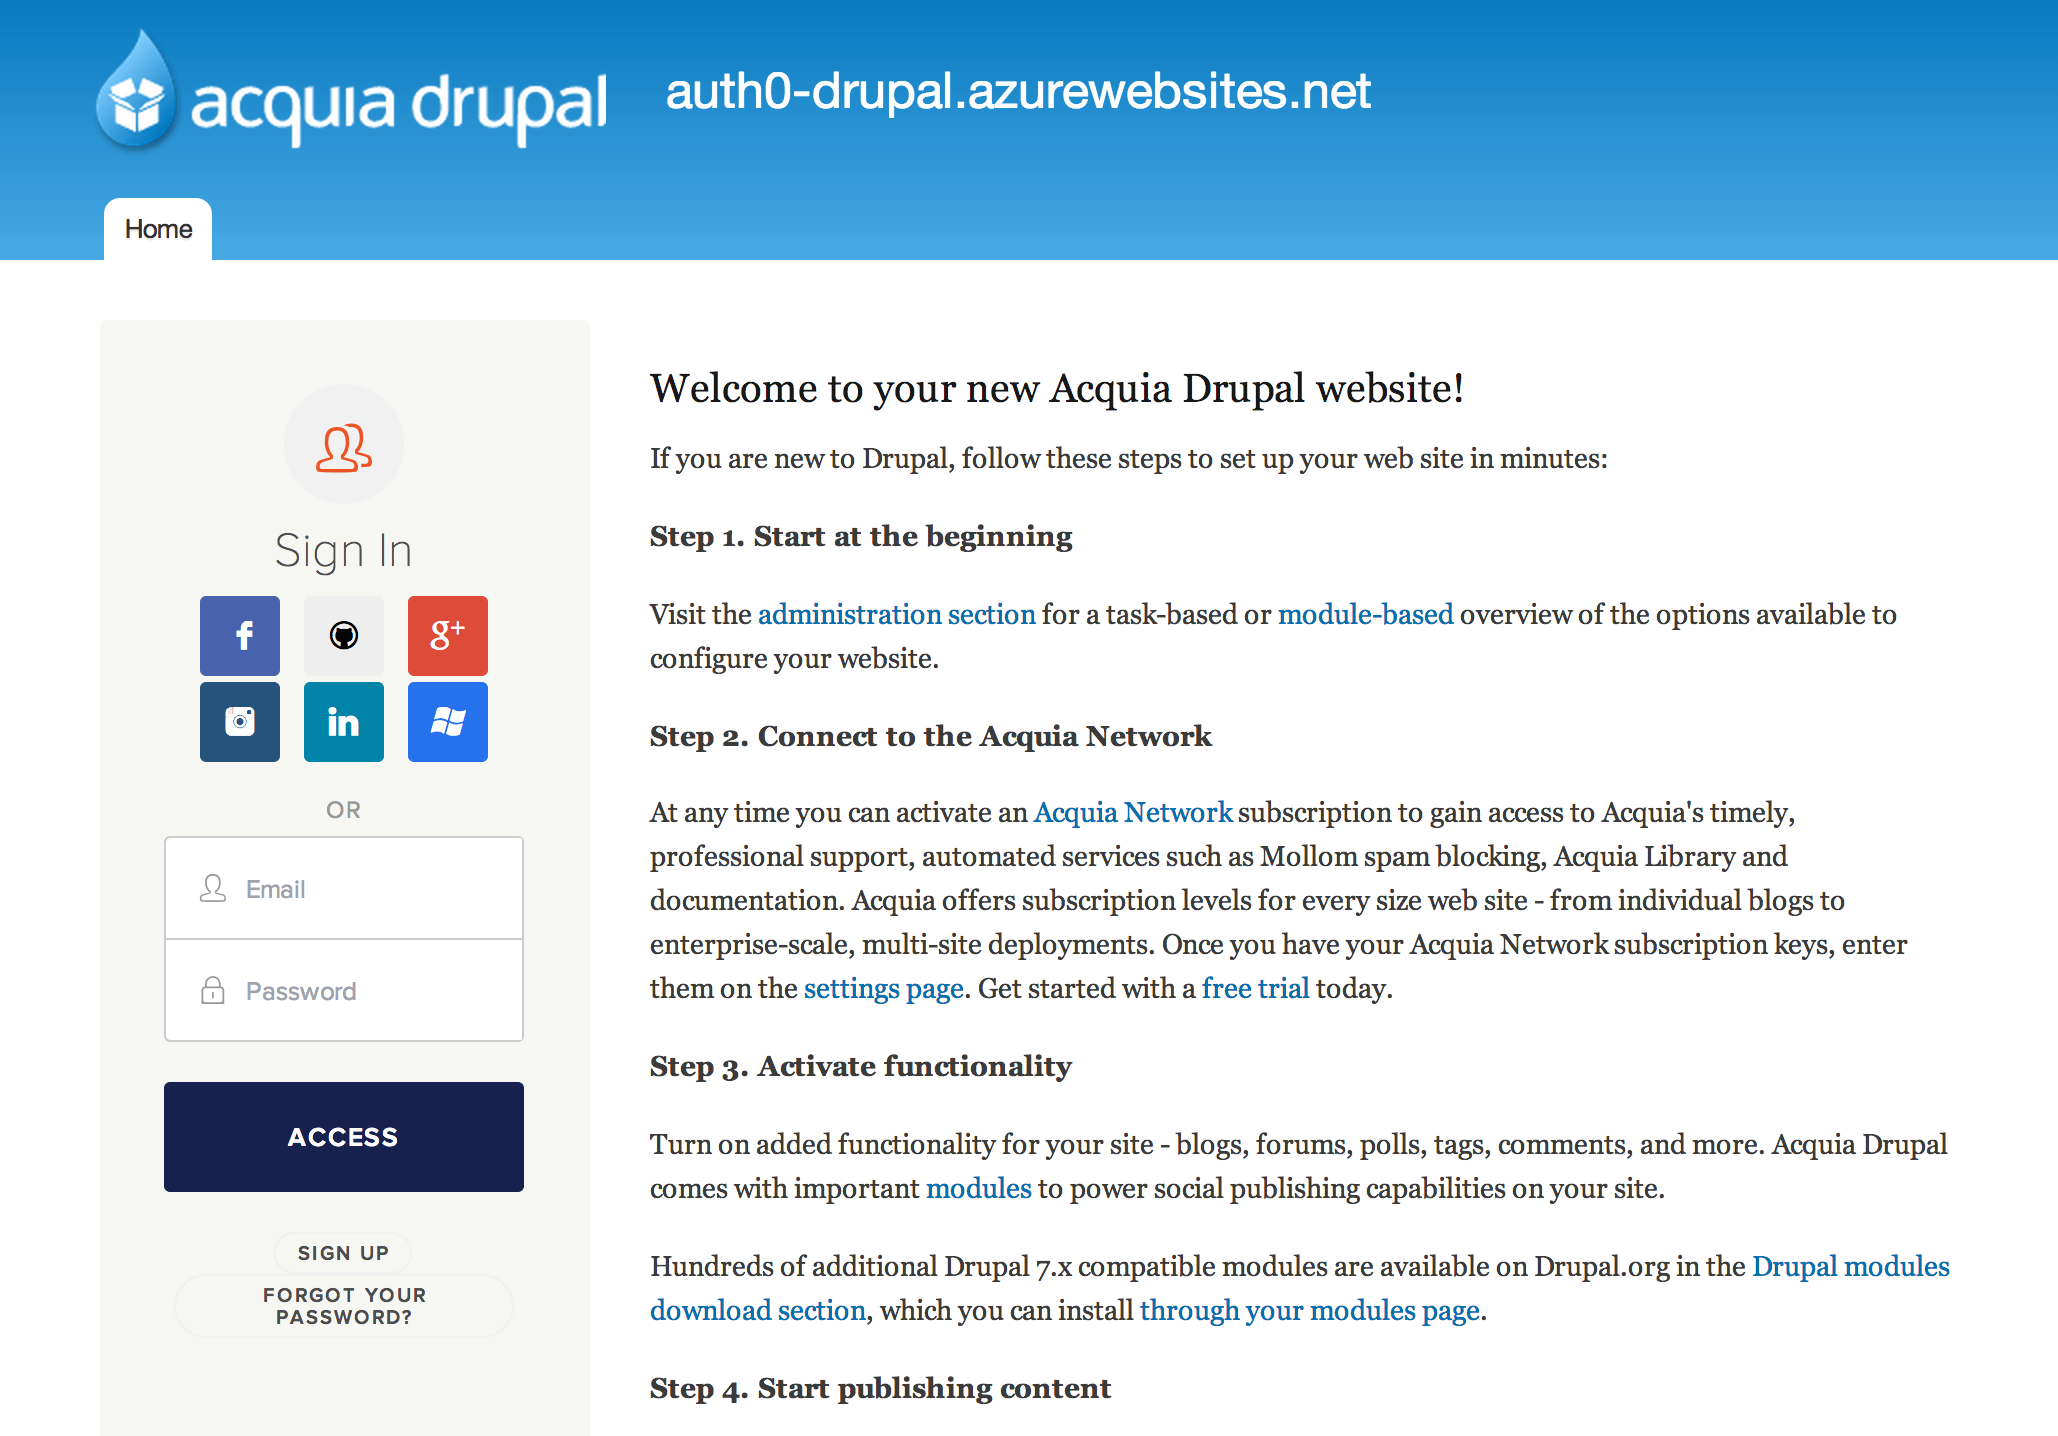 drupal login in anonymous user project